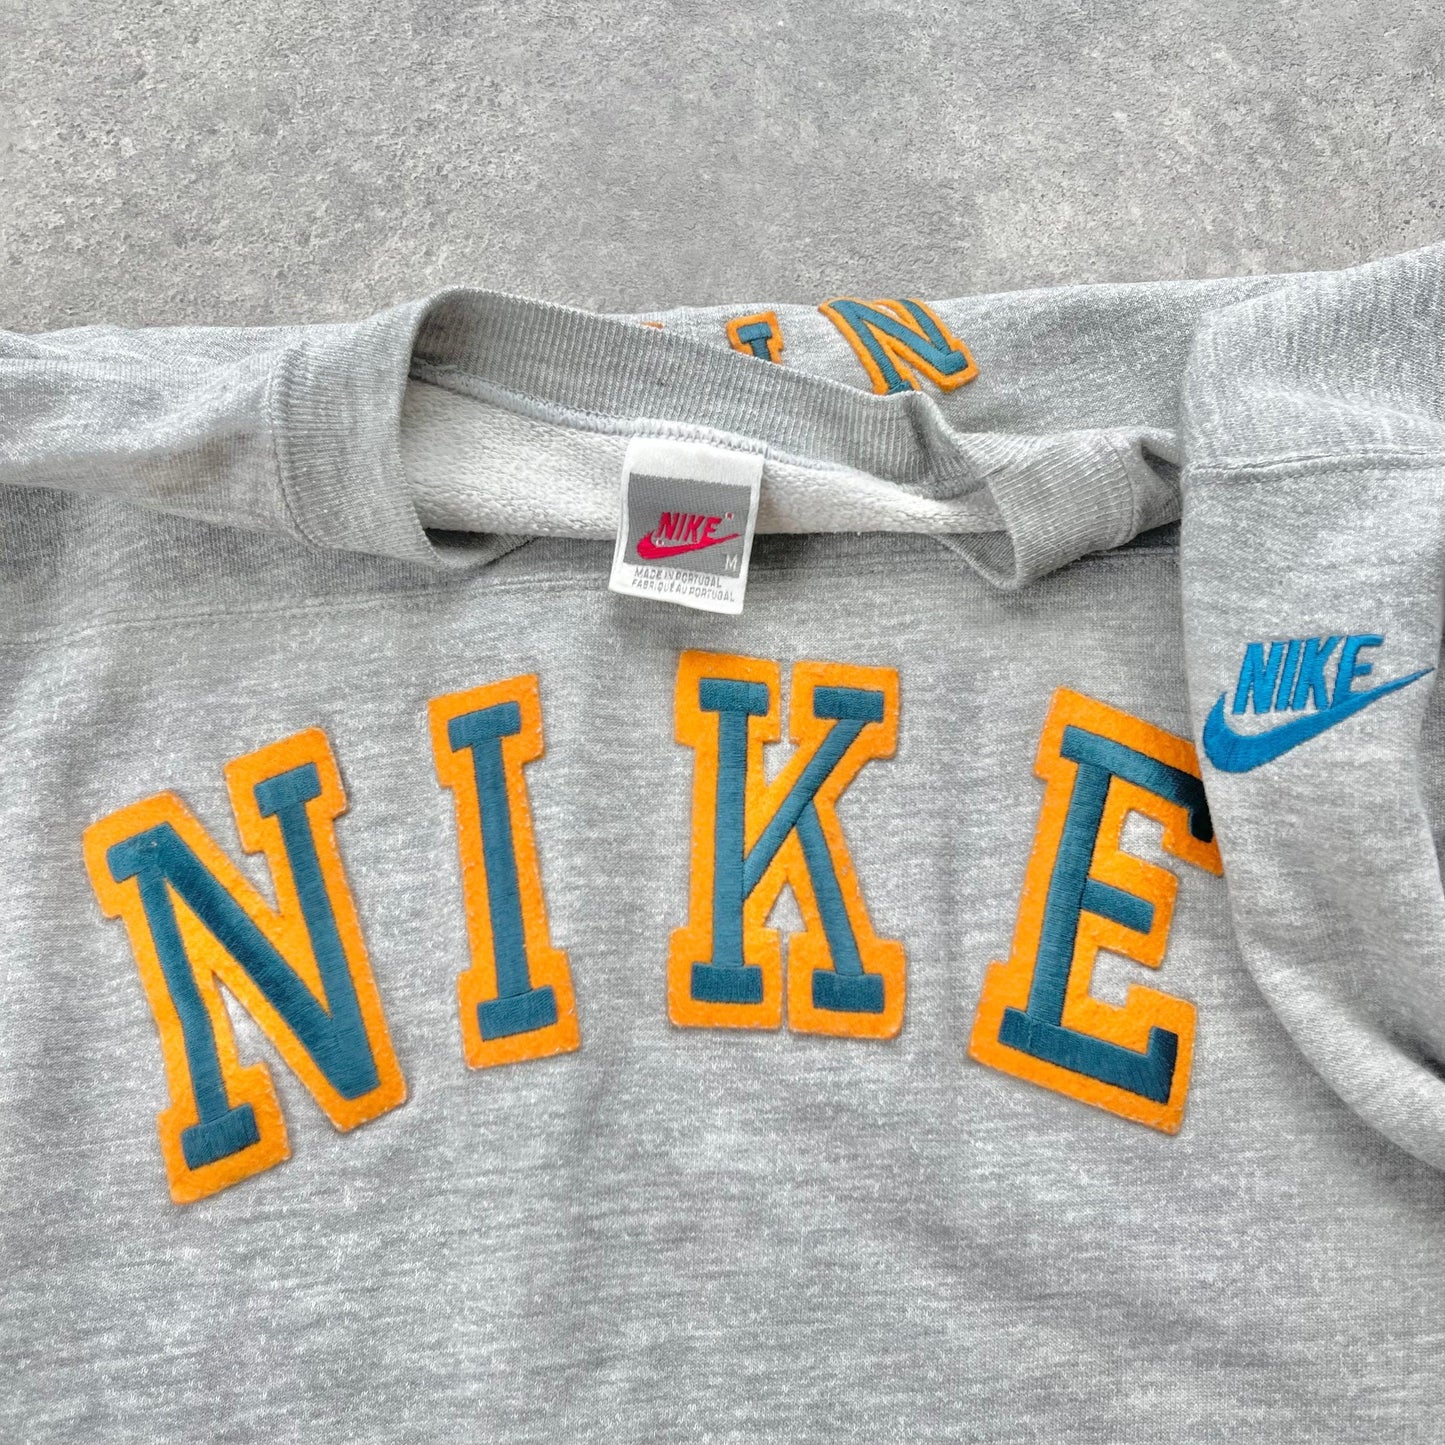 Nike 1980s embroidered heavyweight sweatshirt (M) - Known Source